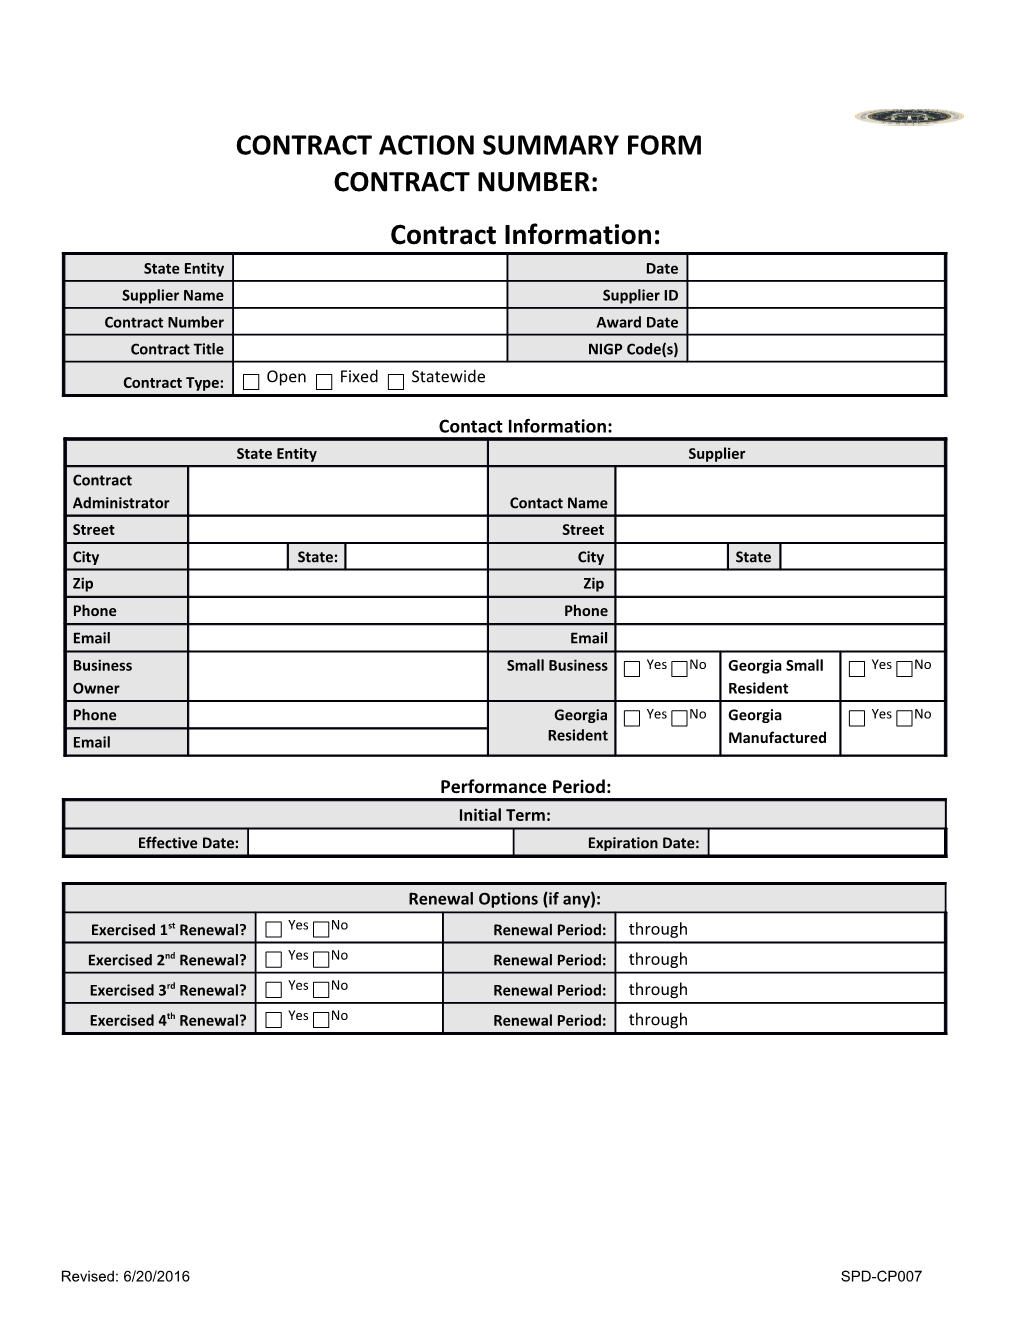 Contract Action Summary Form